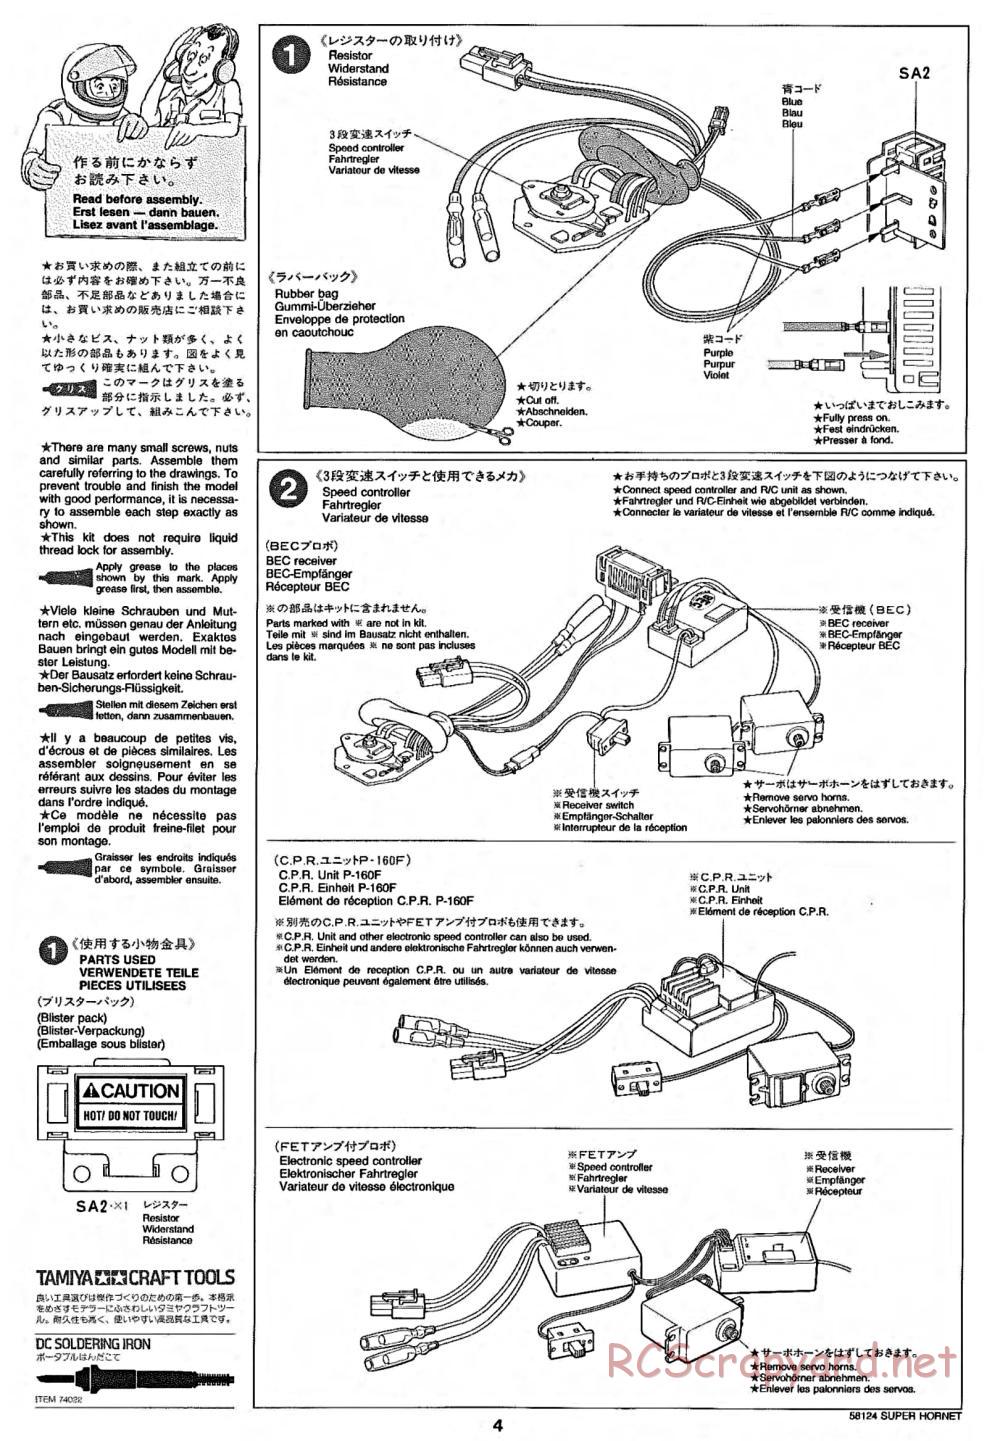 Tamiya - Super Hornet Chassis - Manual - Page 4